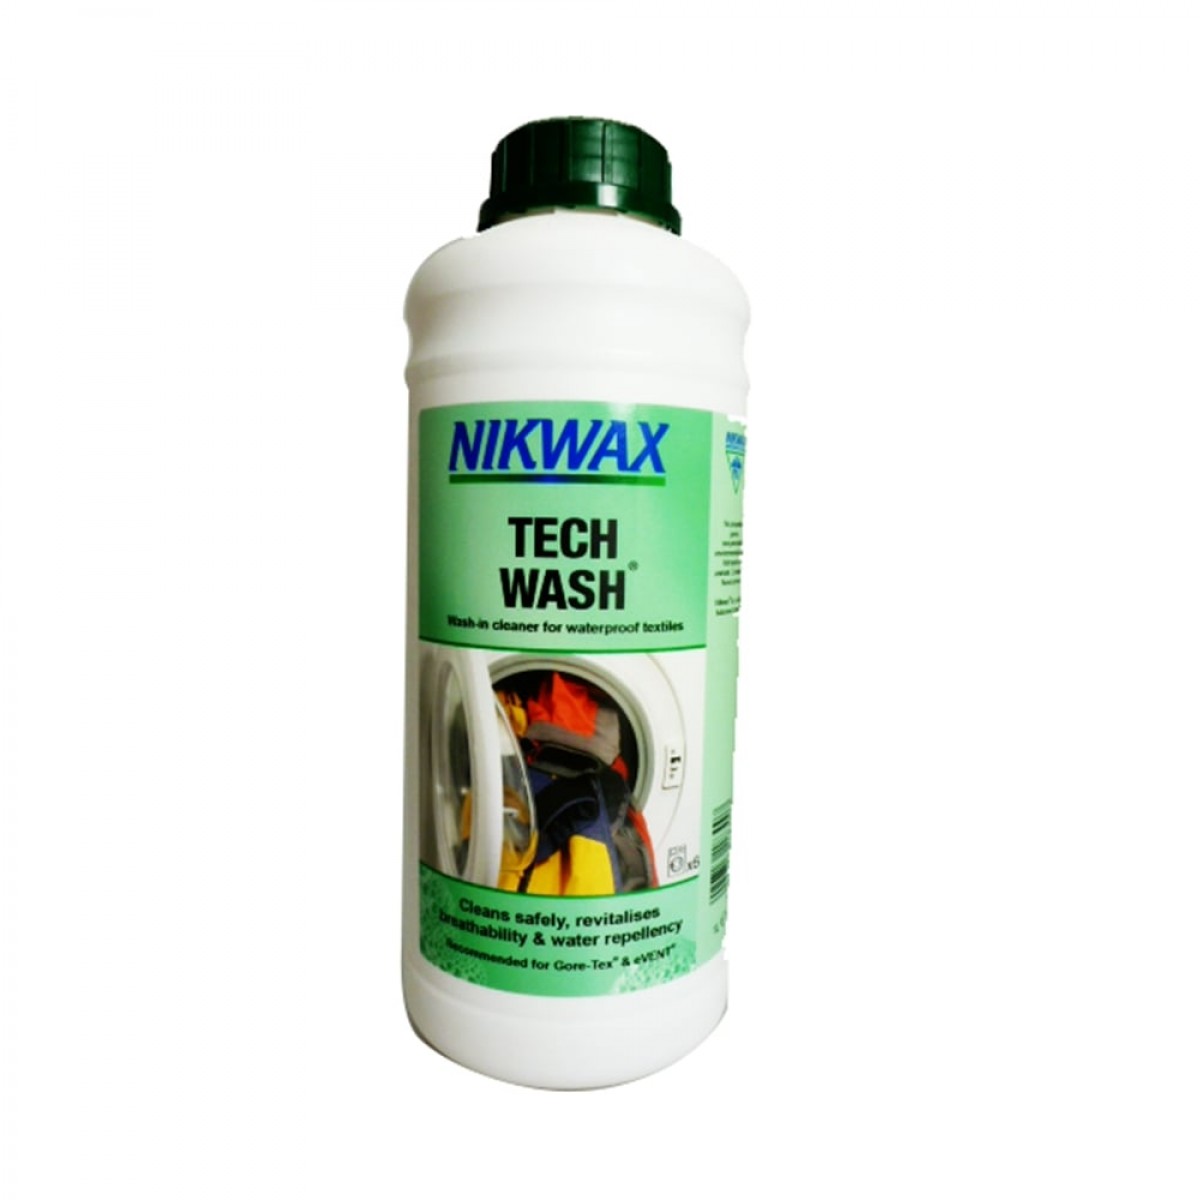 nikwax tech wash litre nikwax tech wash litre clothing care reproofing and  repair